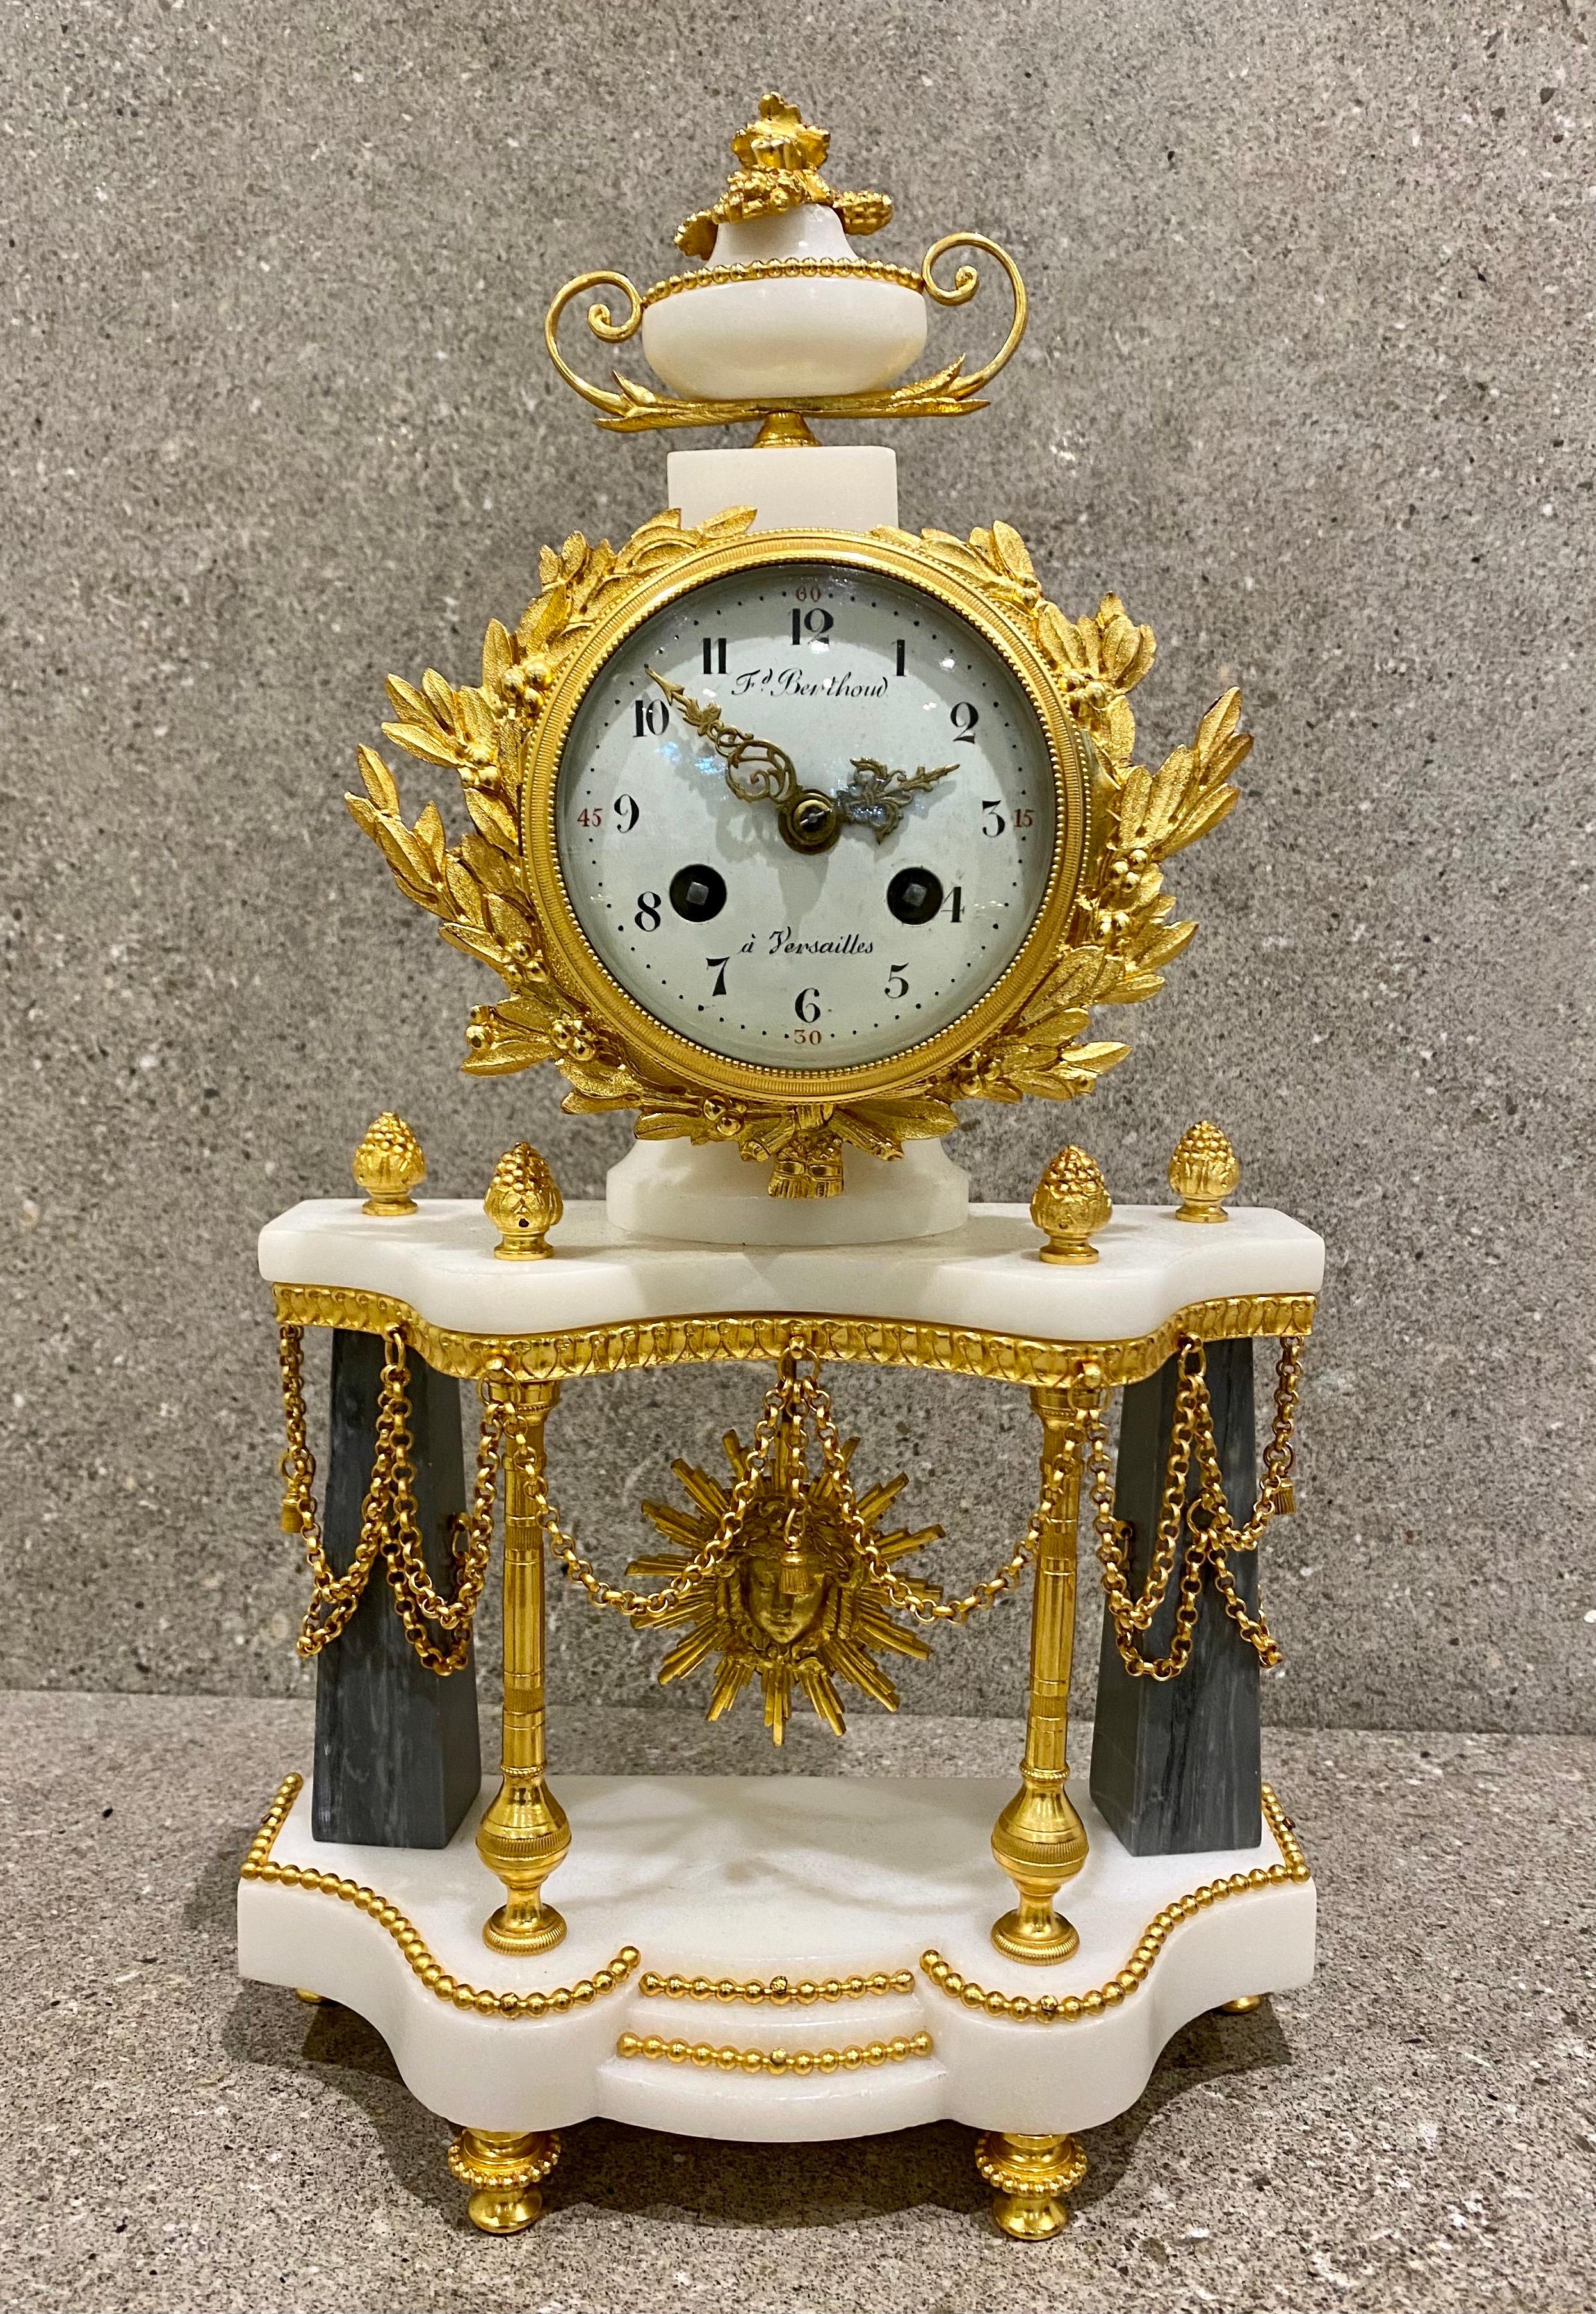 A very fine Louis XVI ormolu clock set, by Ferdinand Berthoud, Paris, circa 1770
This clock set is presented in gilt Bronze and Bleu Turqin and white marble.
A superb combination rarely seen. this is in immaculate order and ready for immediate